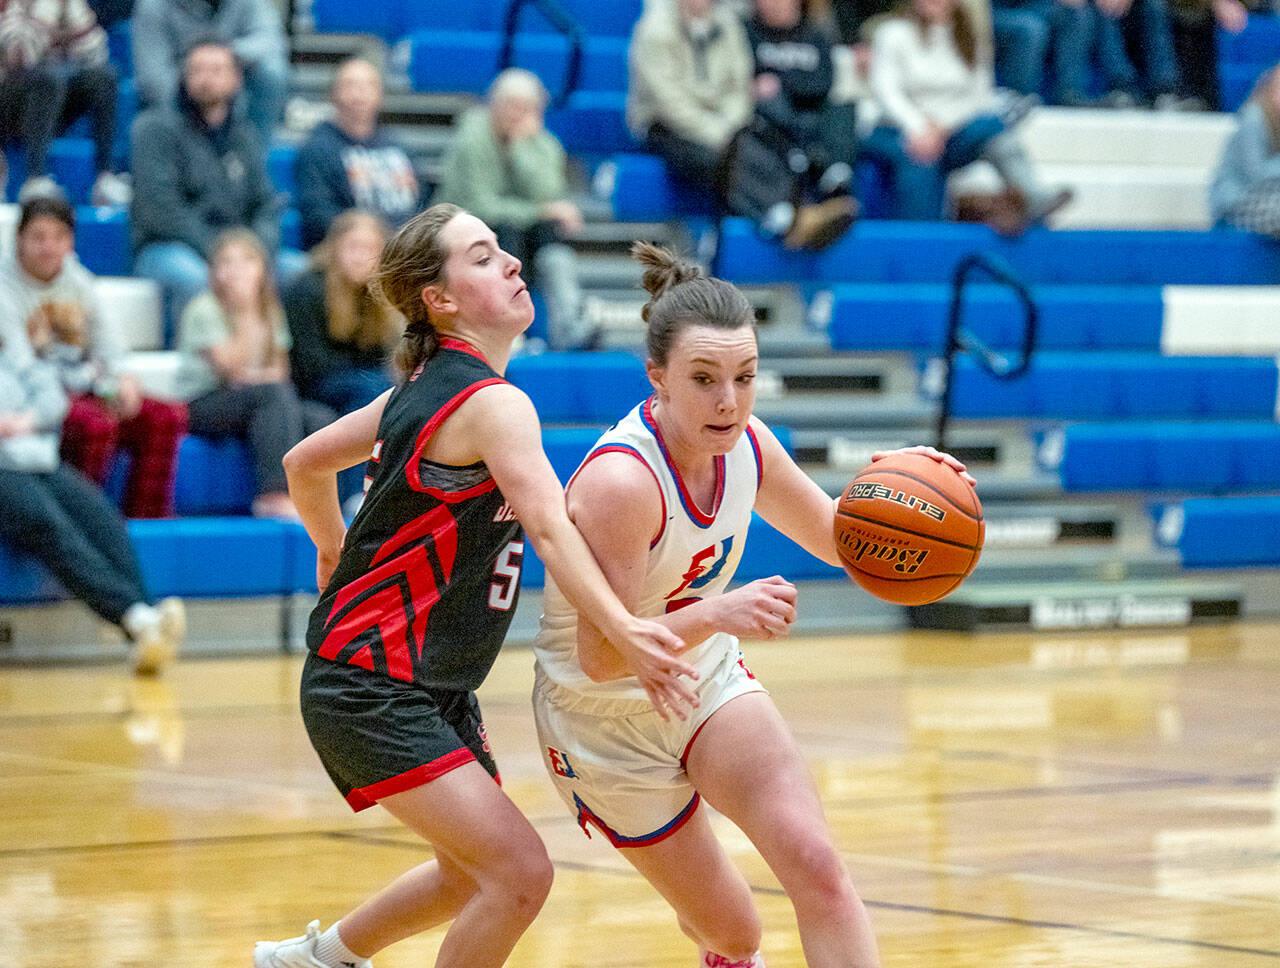 East Jefferson Rival Kay Botkin pushes around Seattle Christian Warrior Trista Vanderveer during a Nisqually League game played in Chimacum on Monday. (Steve Mullensky/for Peninsula Daily News)